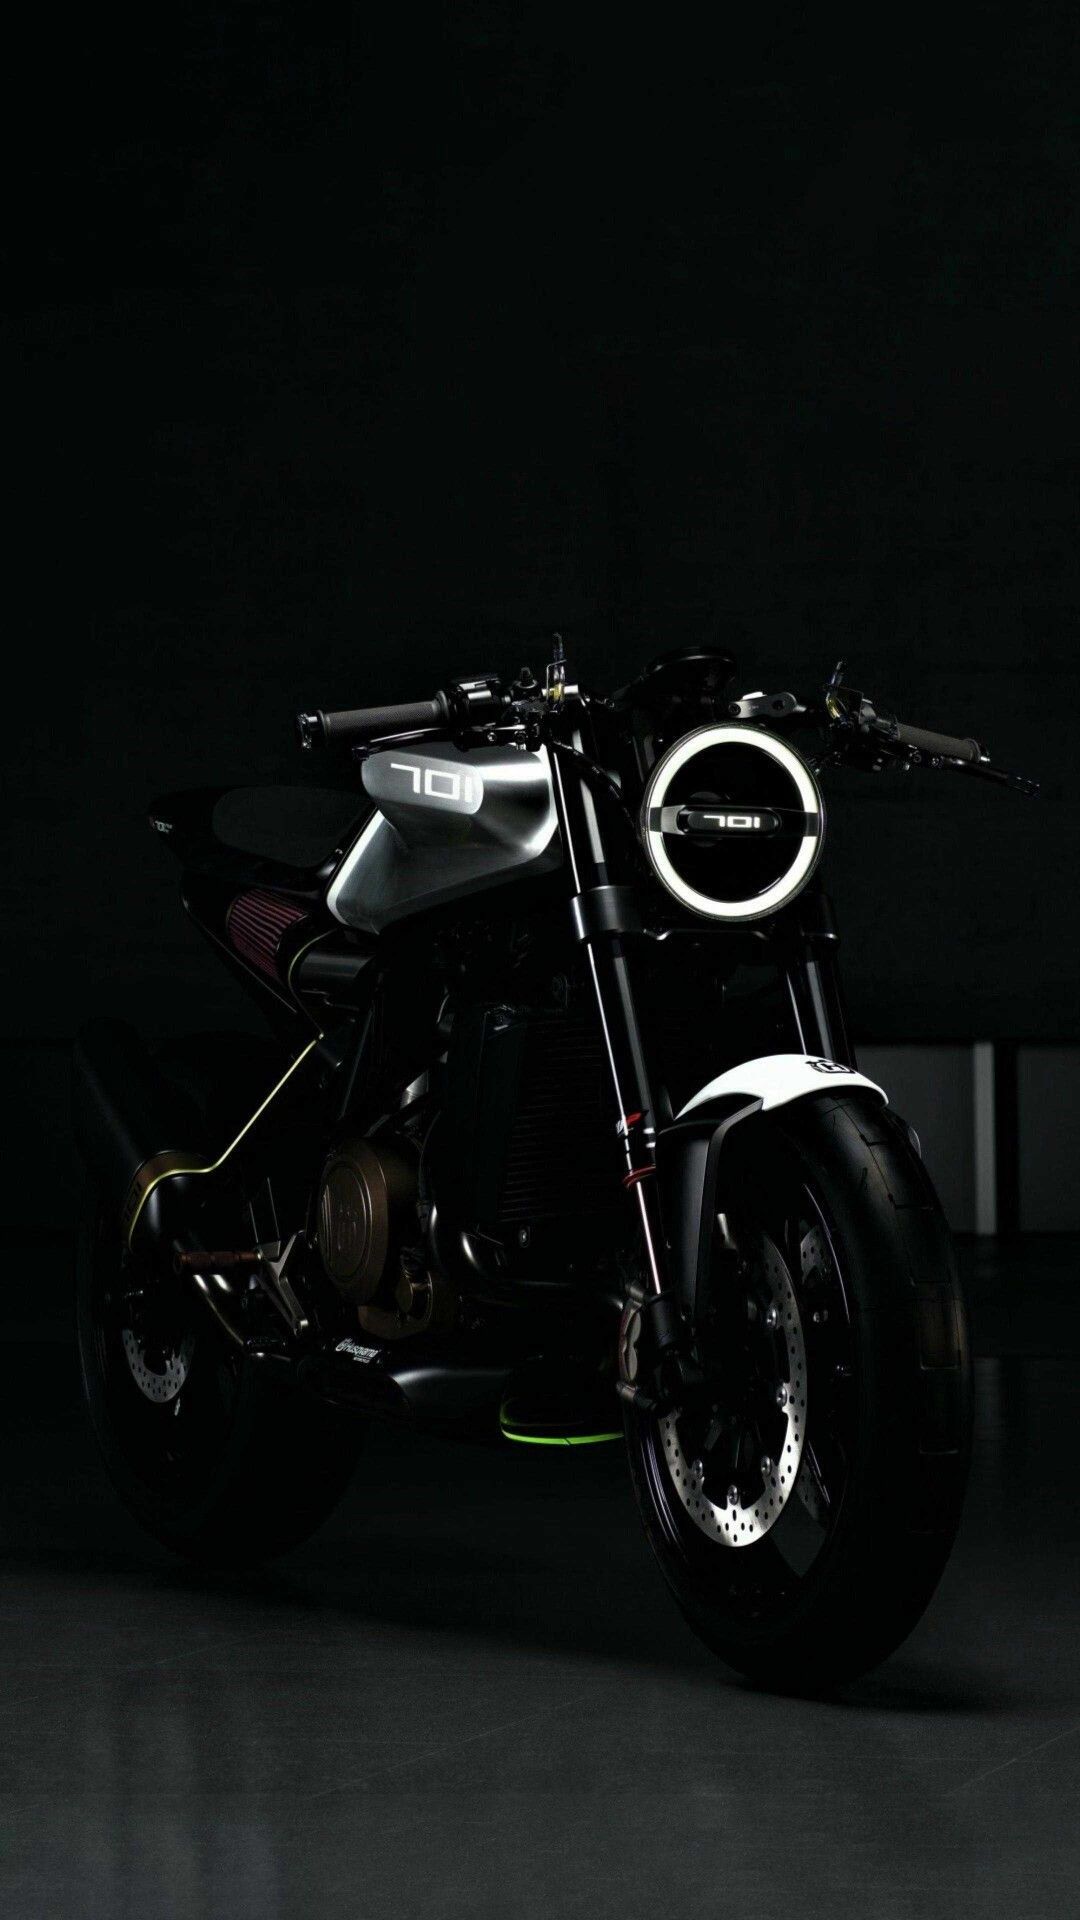 Motorcycle iPhone Wallpapers - Wallpaper Cave